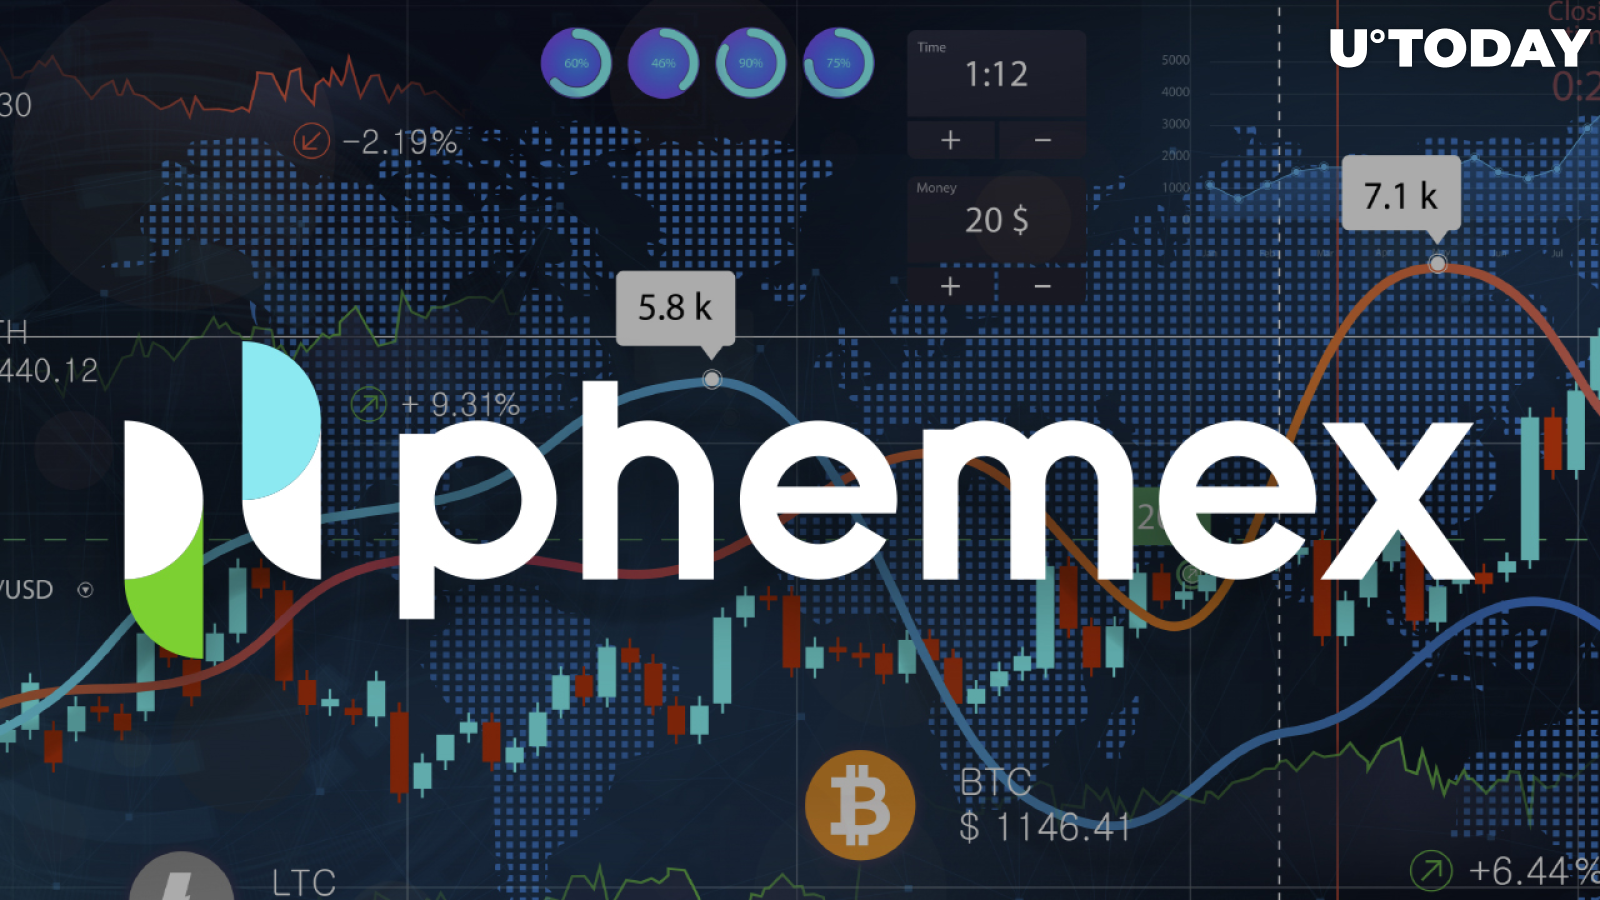 Crypto Exchange Phemex Turns Two: Here's What Has Been Accomplished So Far